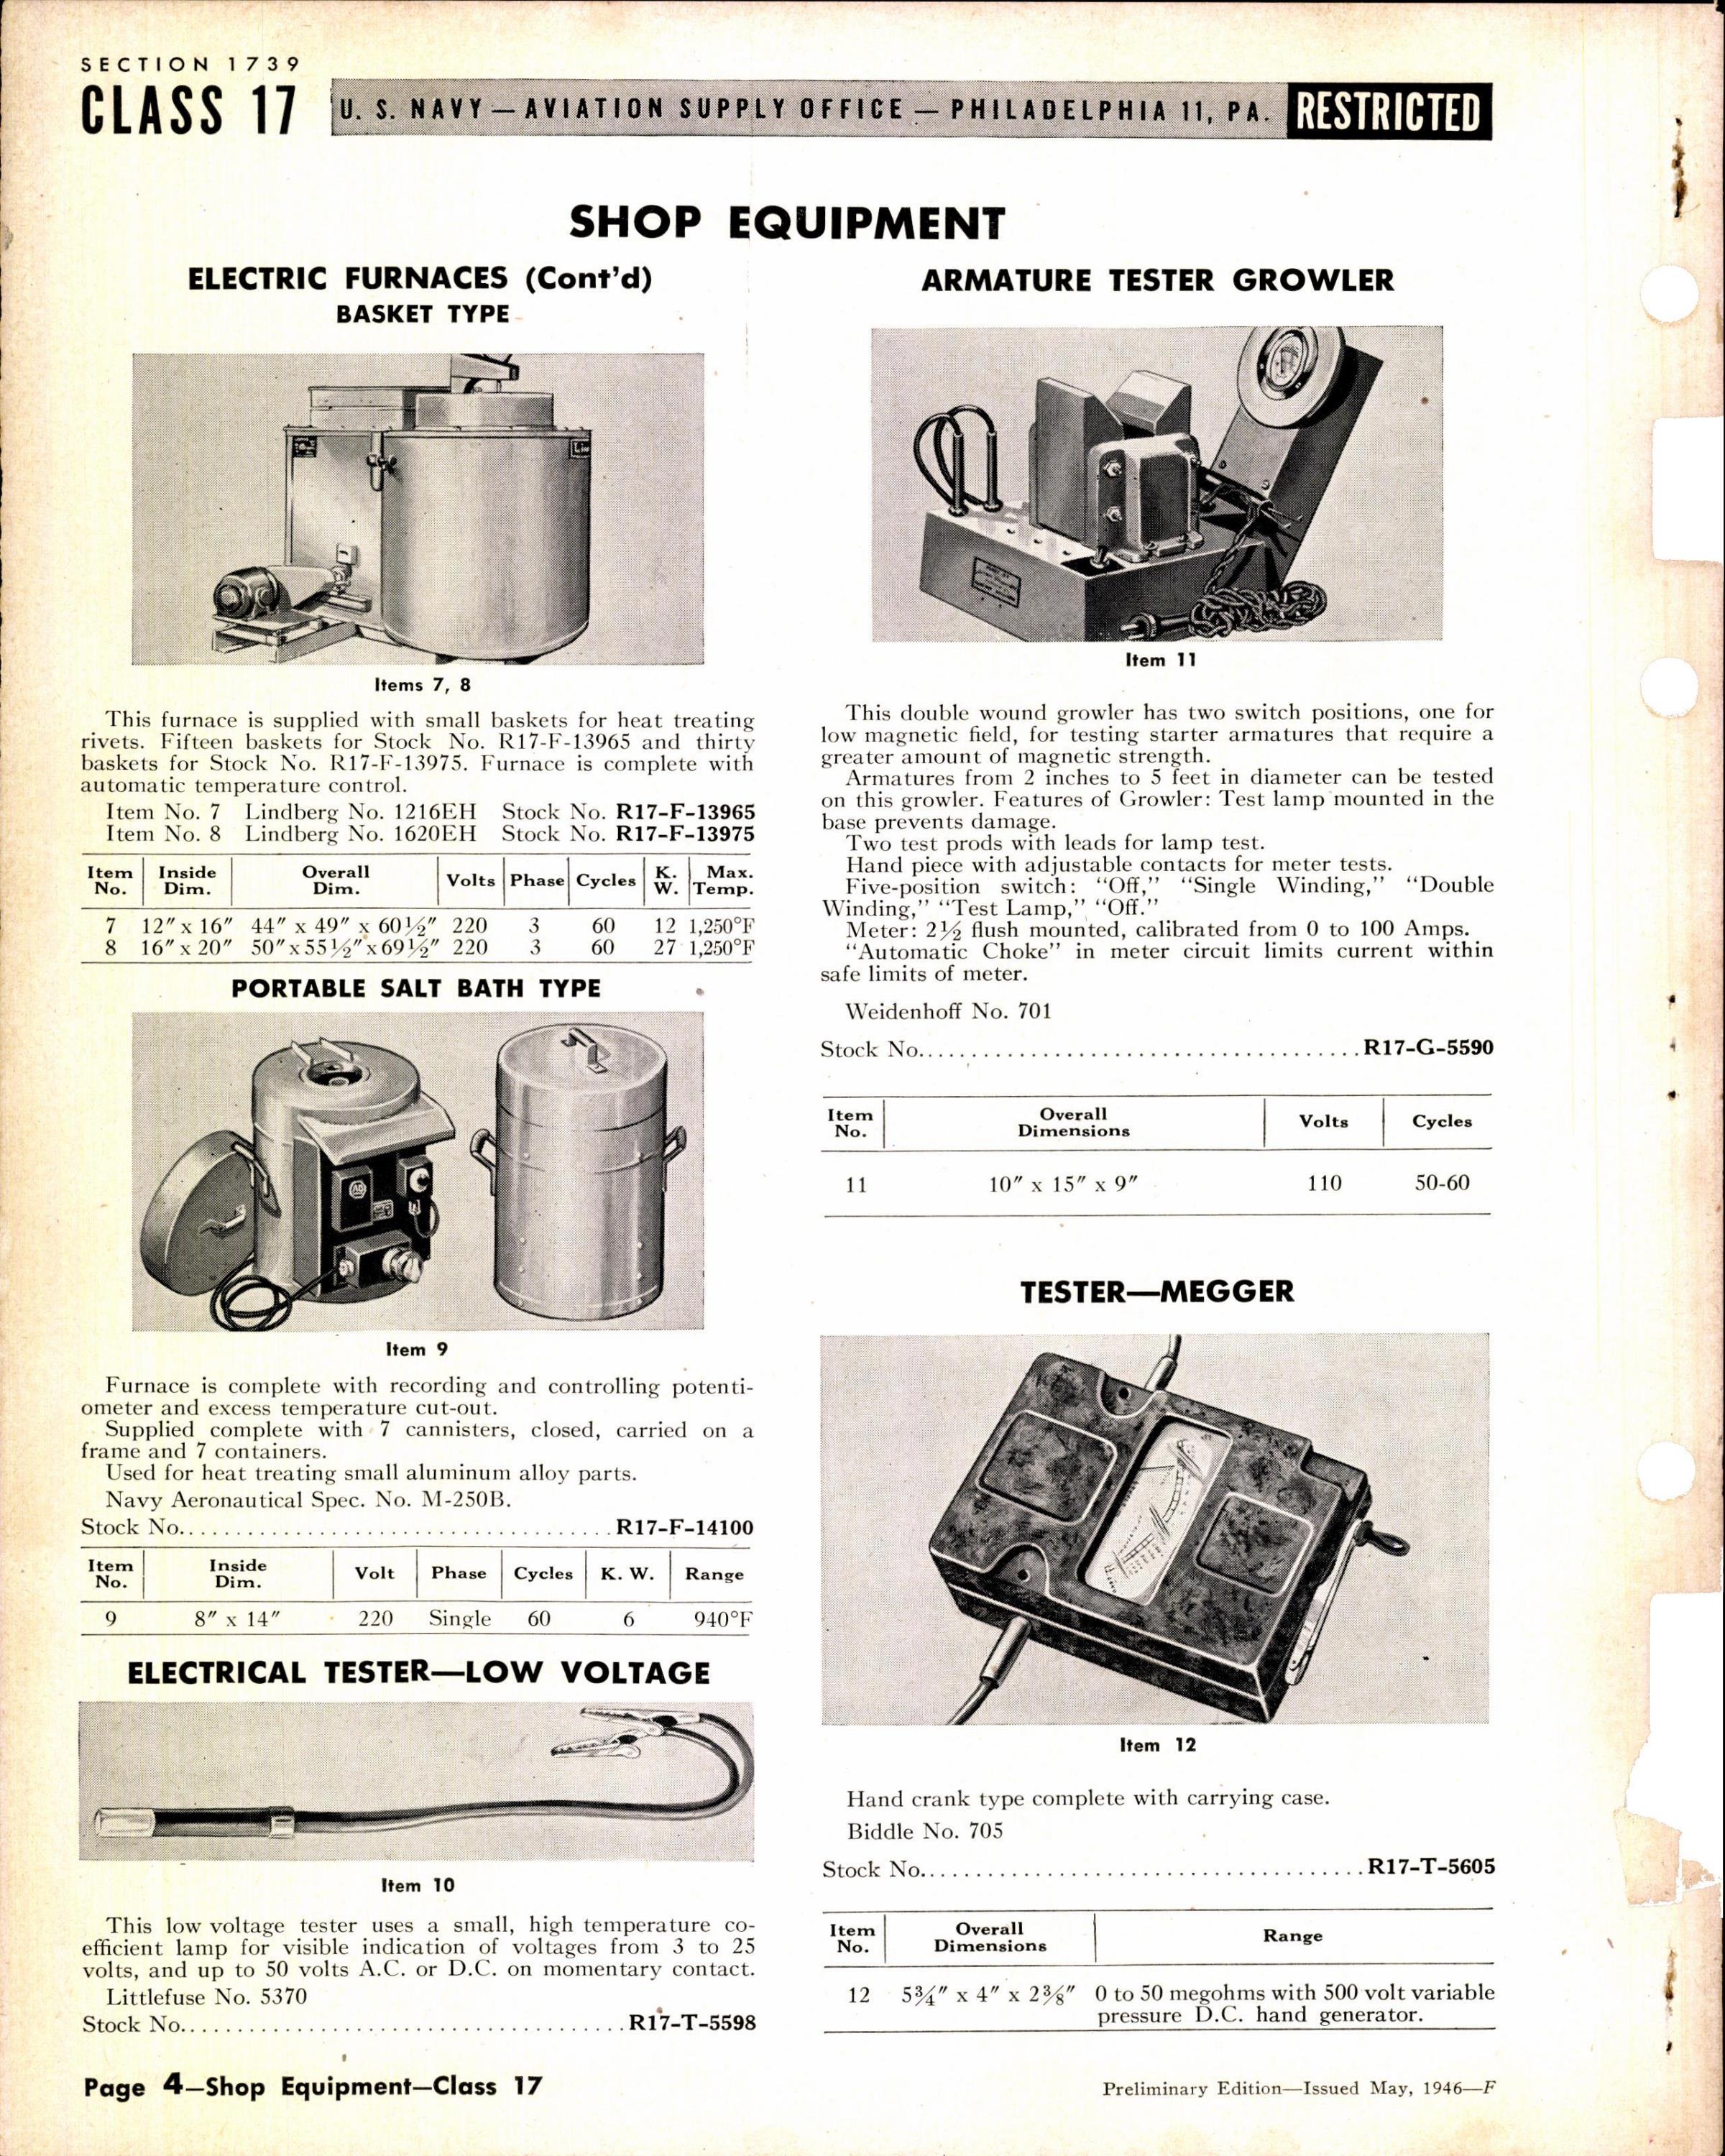 Sample page 4 from AirCorps Library document: Shop Equipment